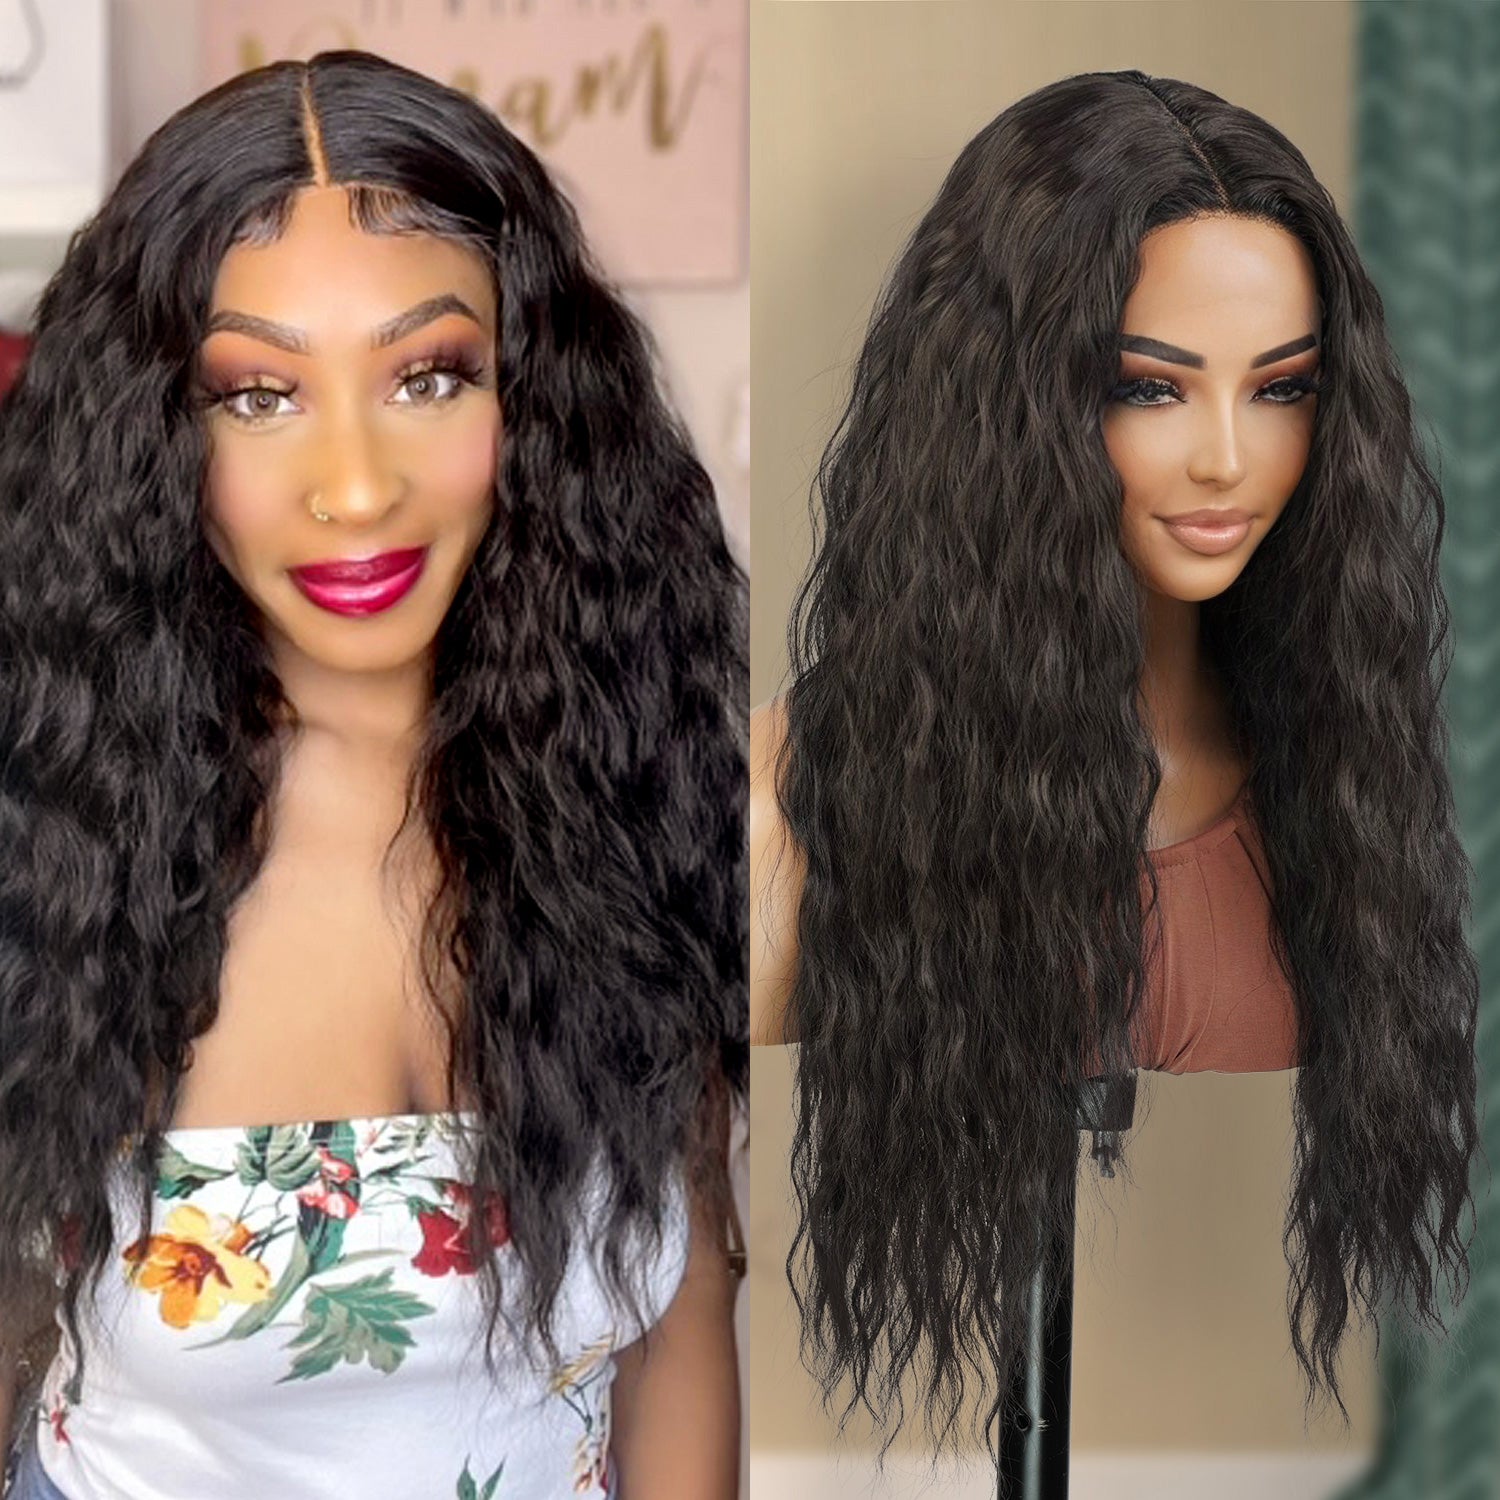 Introducing our long wavy loose deep wave Soft Swiss lace front wig! Made with high-quality heat-resistant synthetic fibers, this wig features a 4.5" deep middle center part for a natural-looking hairline. The adjustable straps provide a secure fit, while the soft Swiss lace front seamlessly blends with your natural hairline. Perfect for daily wear, cosplay, or parties. Shop now for style and versatility!